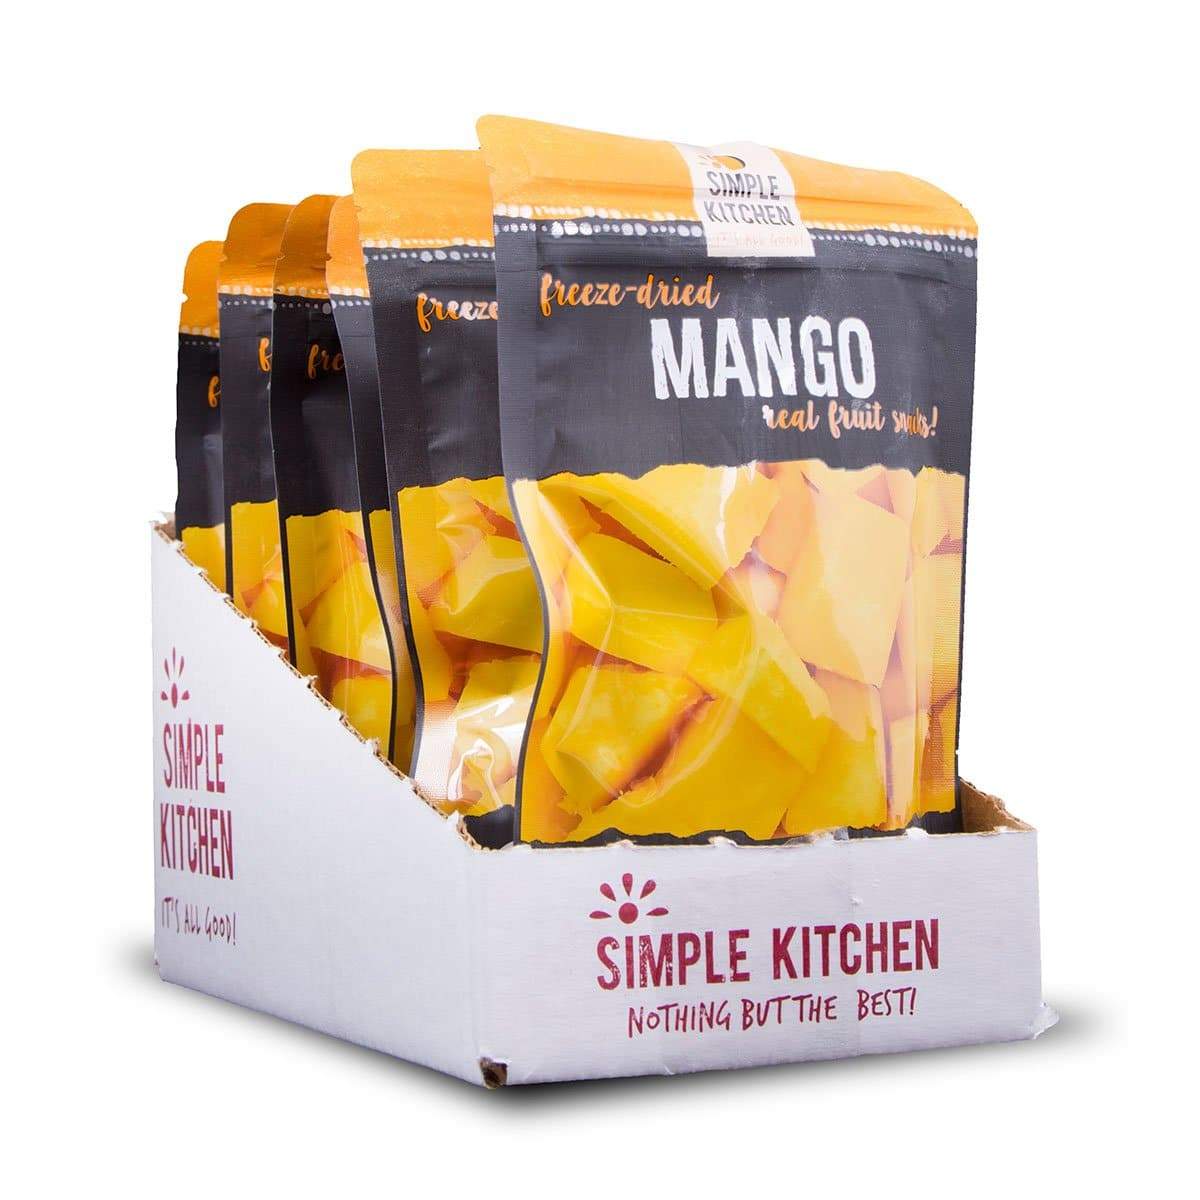 ReadyWise (formerly Wise Food Storage) Freeze-Dried Mango - 6 Pack - (SHIPS IN 1-2 WEEKS).